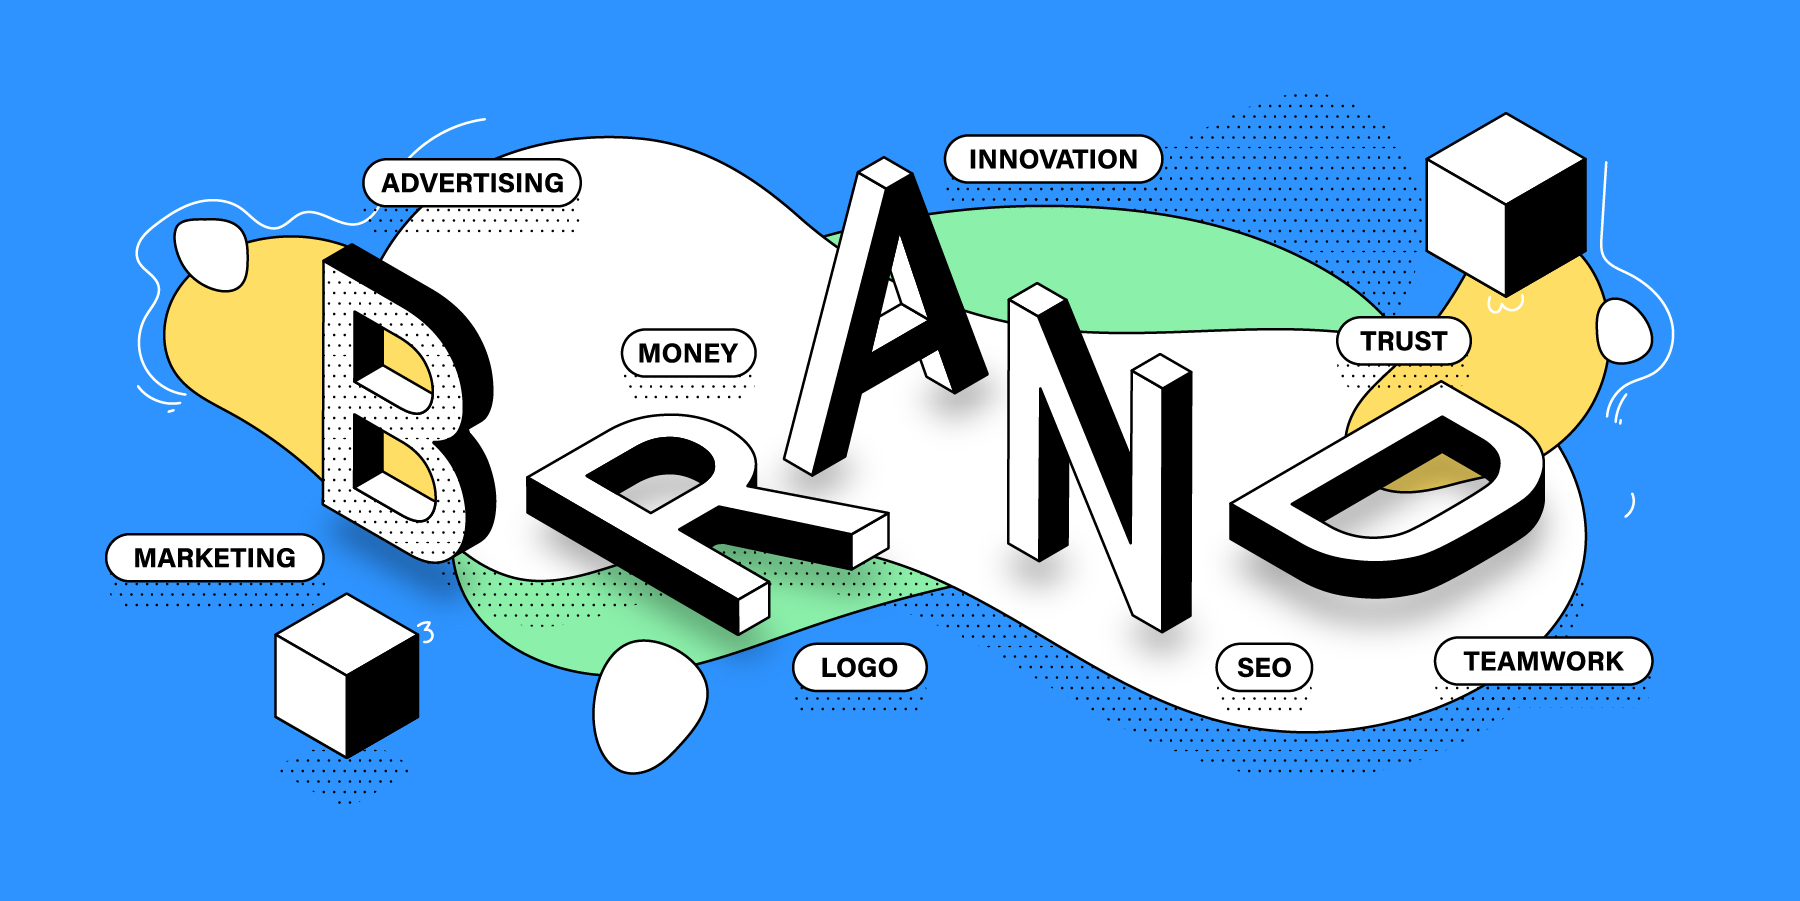 Image that displays the various aspects of brand equity as a freelancer